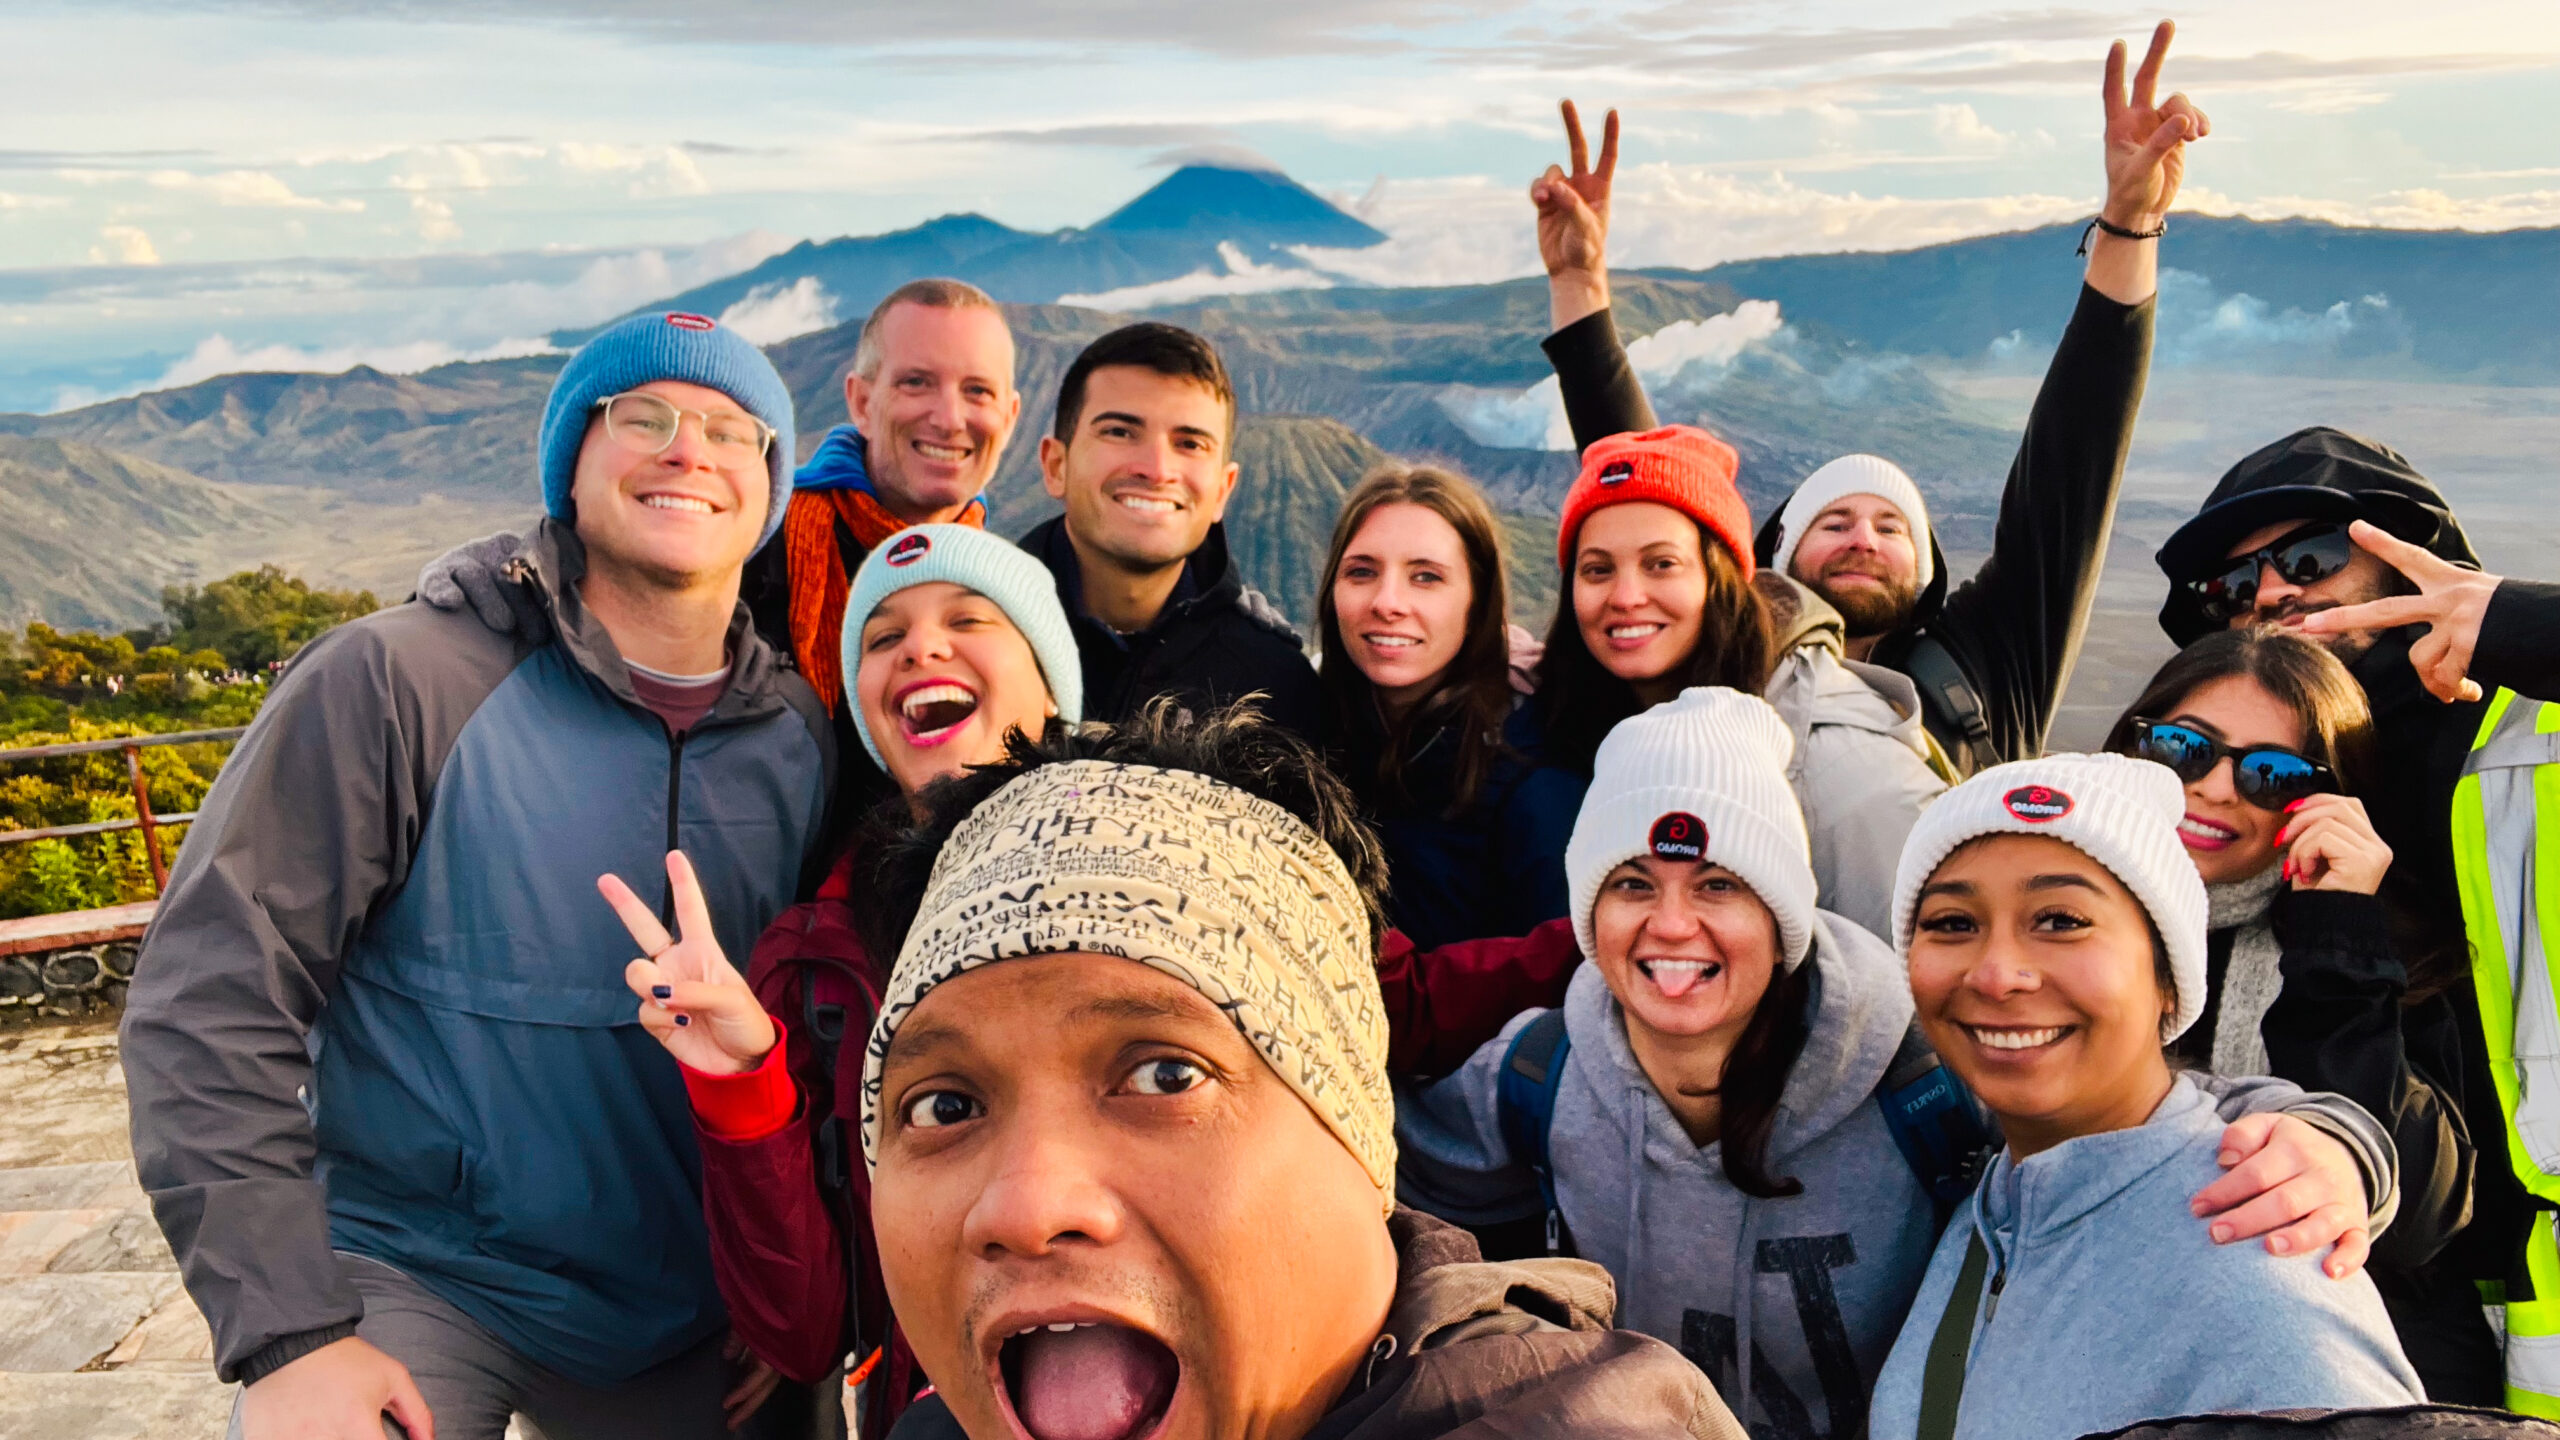 Group photo in Mount Bromo